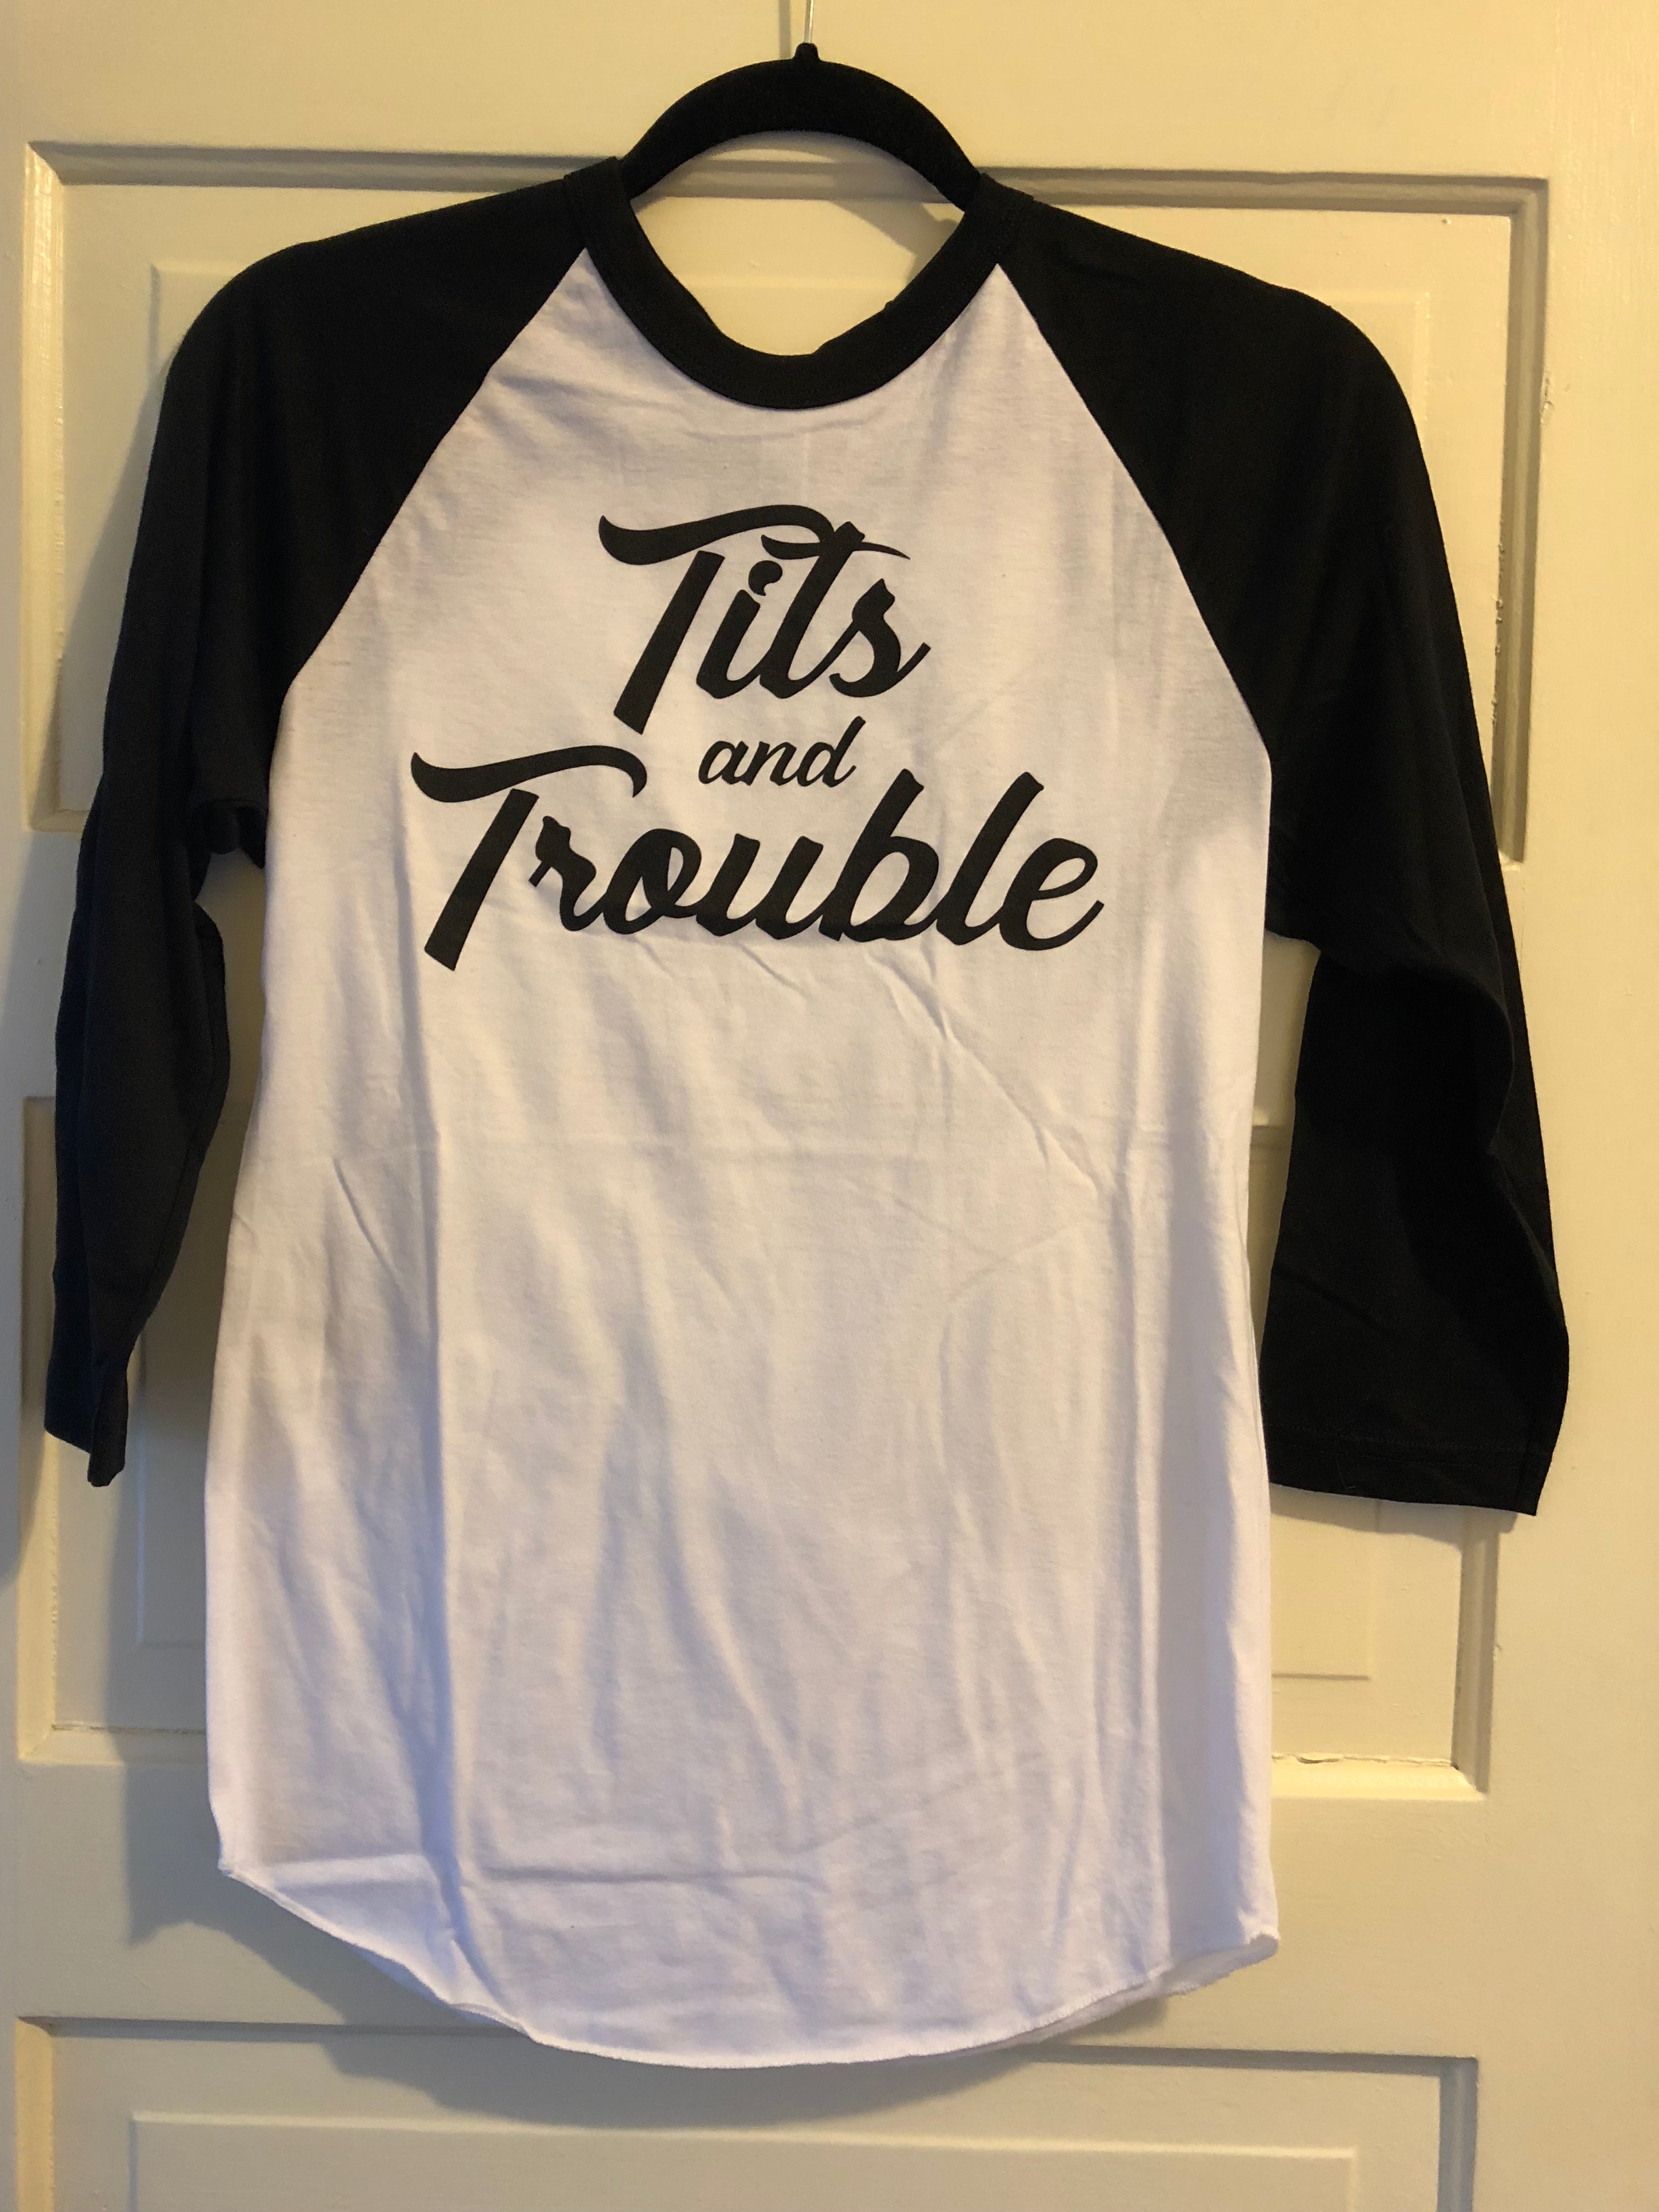 All Tits and Trouble ON SALE